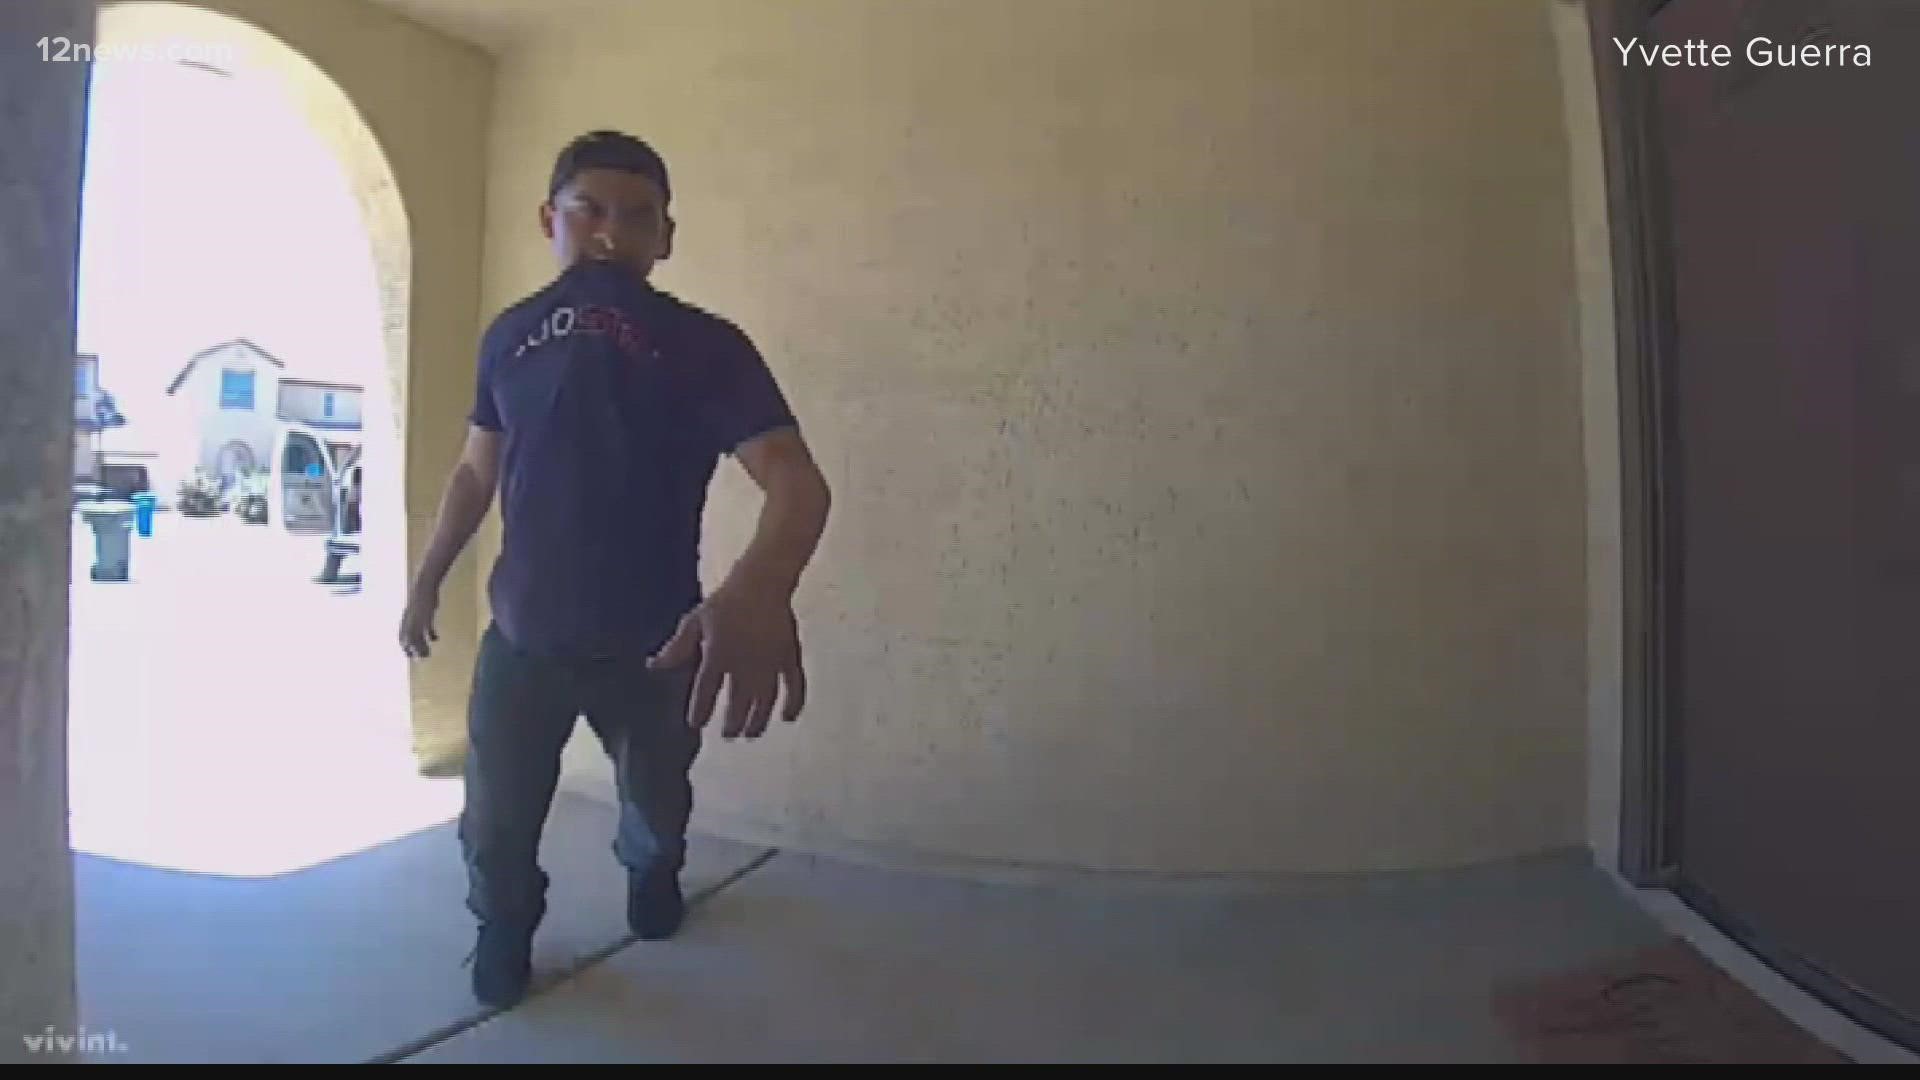 Yvette Guerra shared doorbell footage of the two people breaking into her house on Tik Tok in hopes someone recognizes the pair.